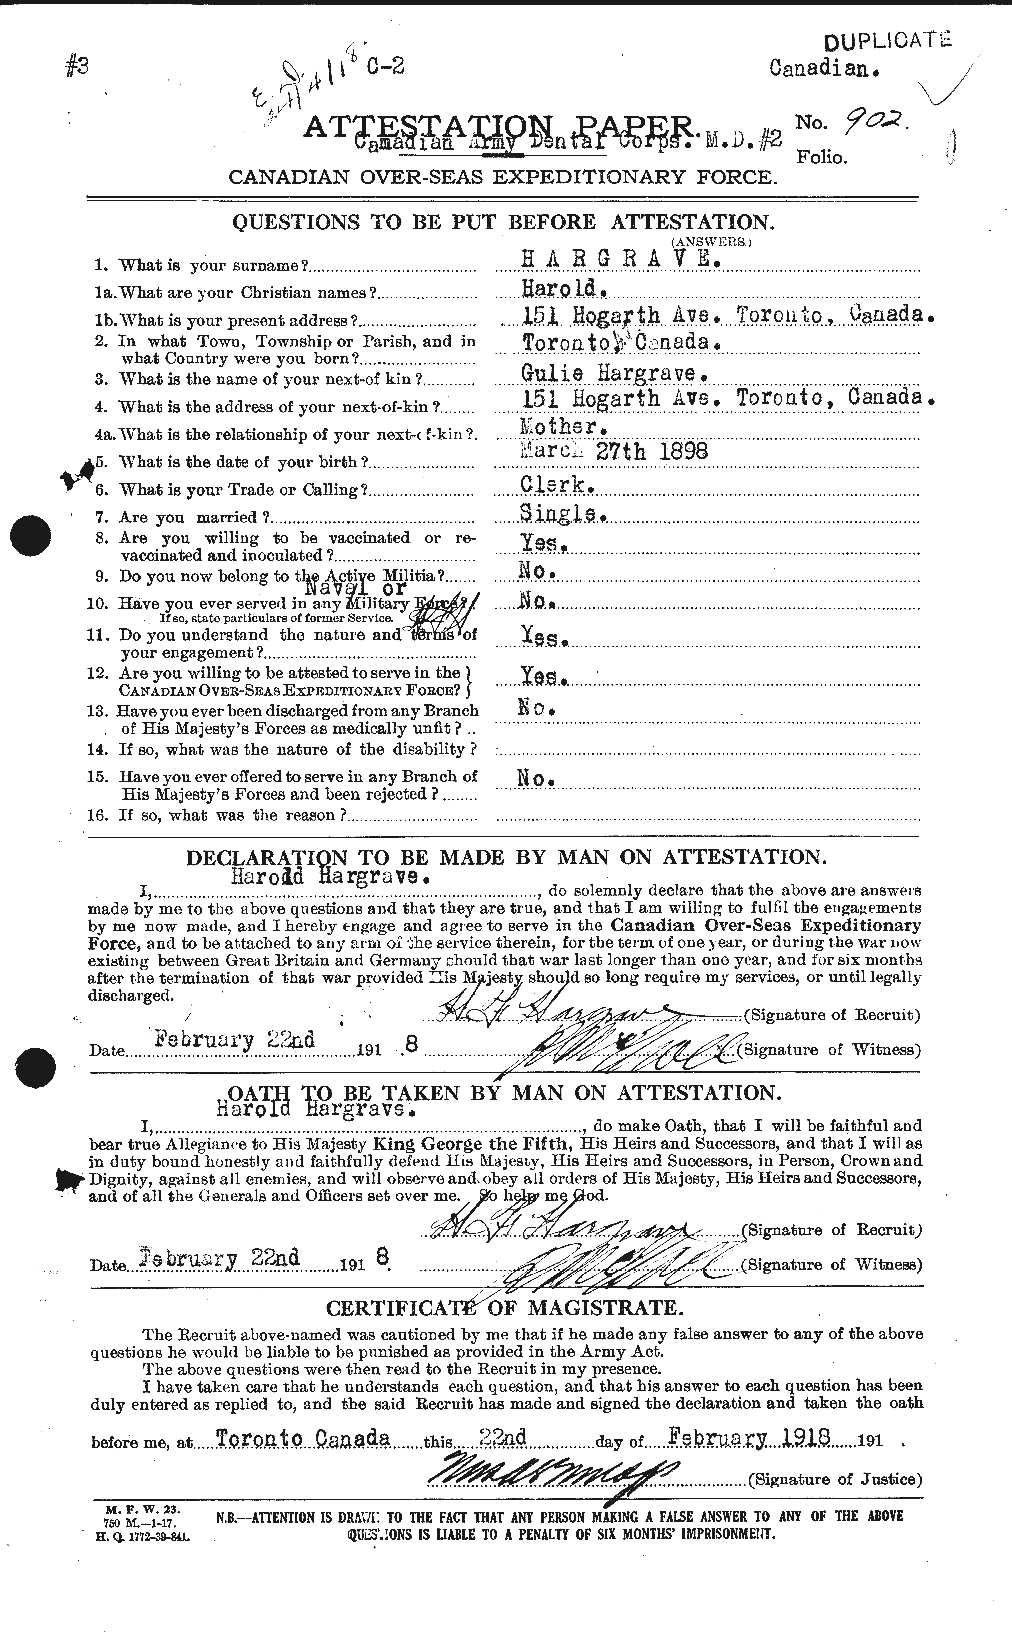 Personnel Records of the First World War - CEF 378037a